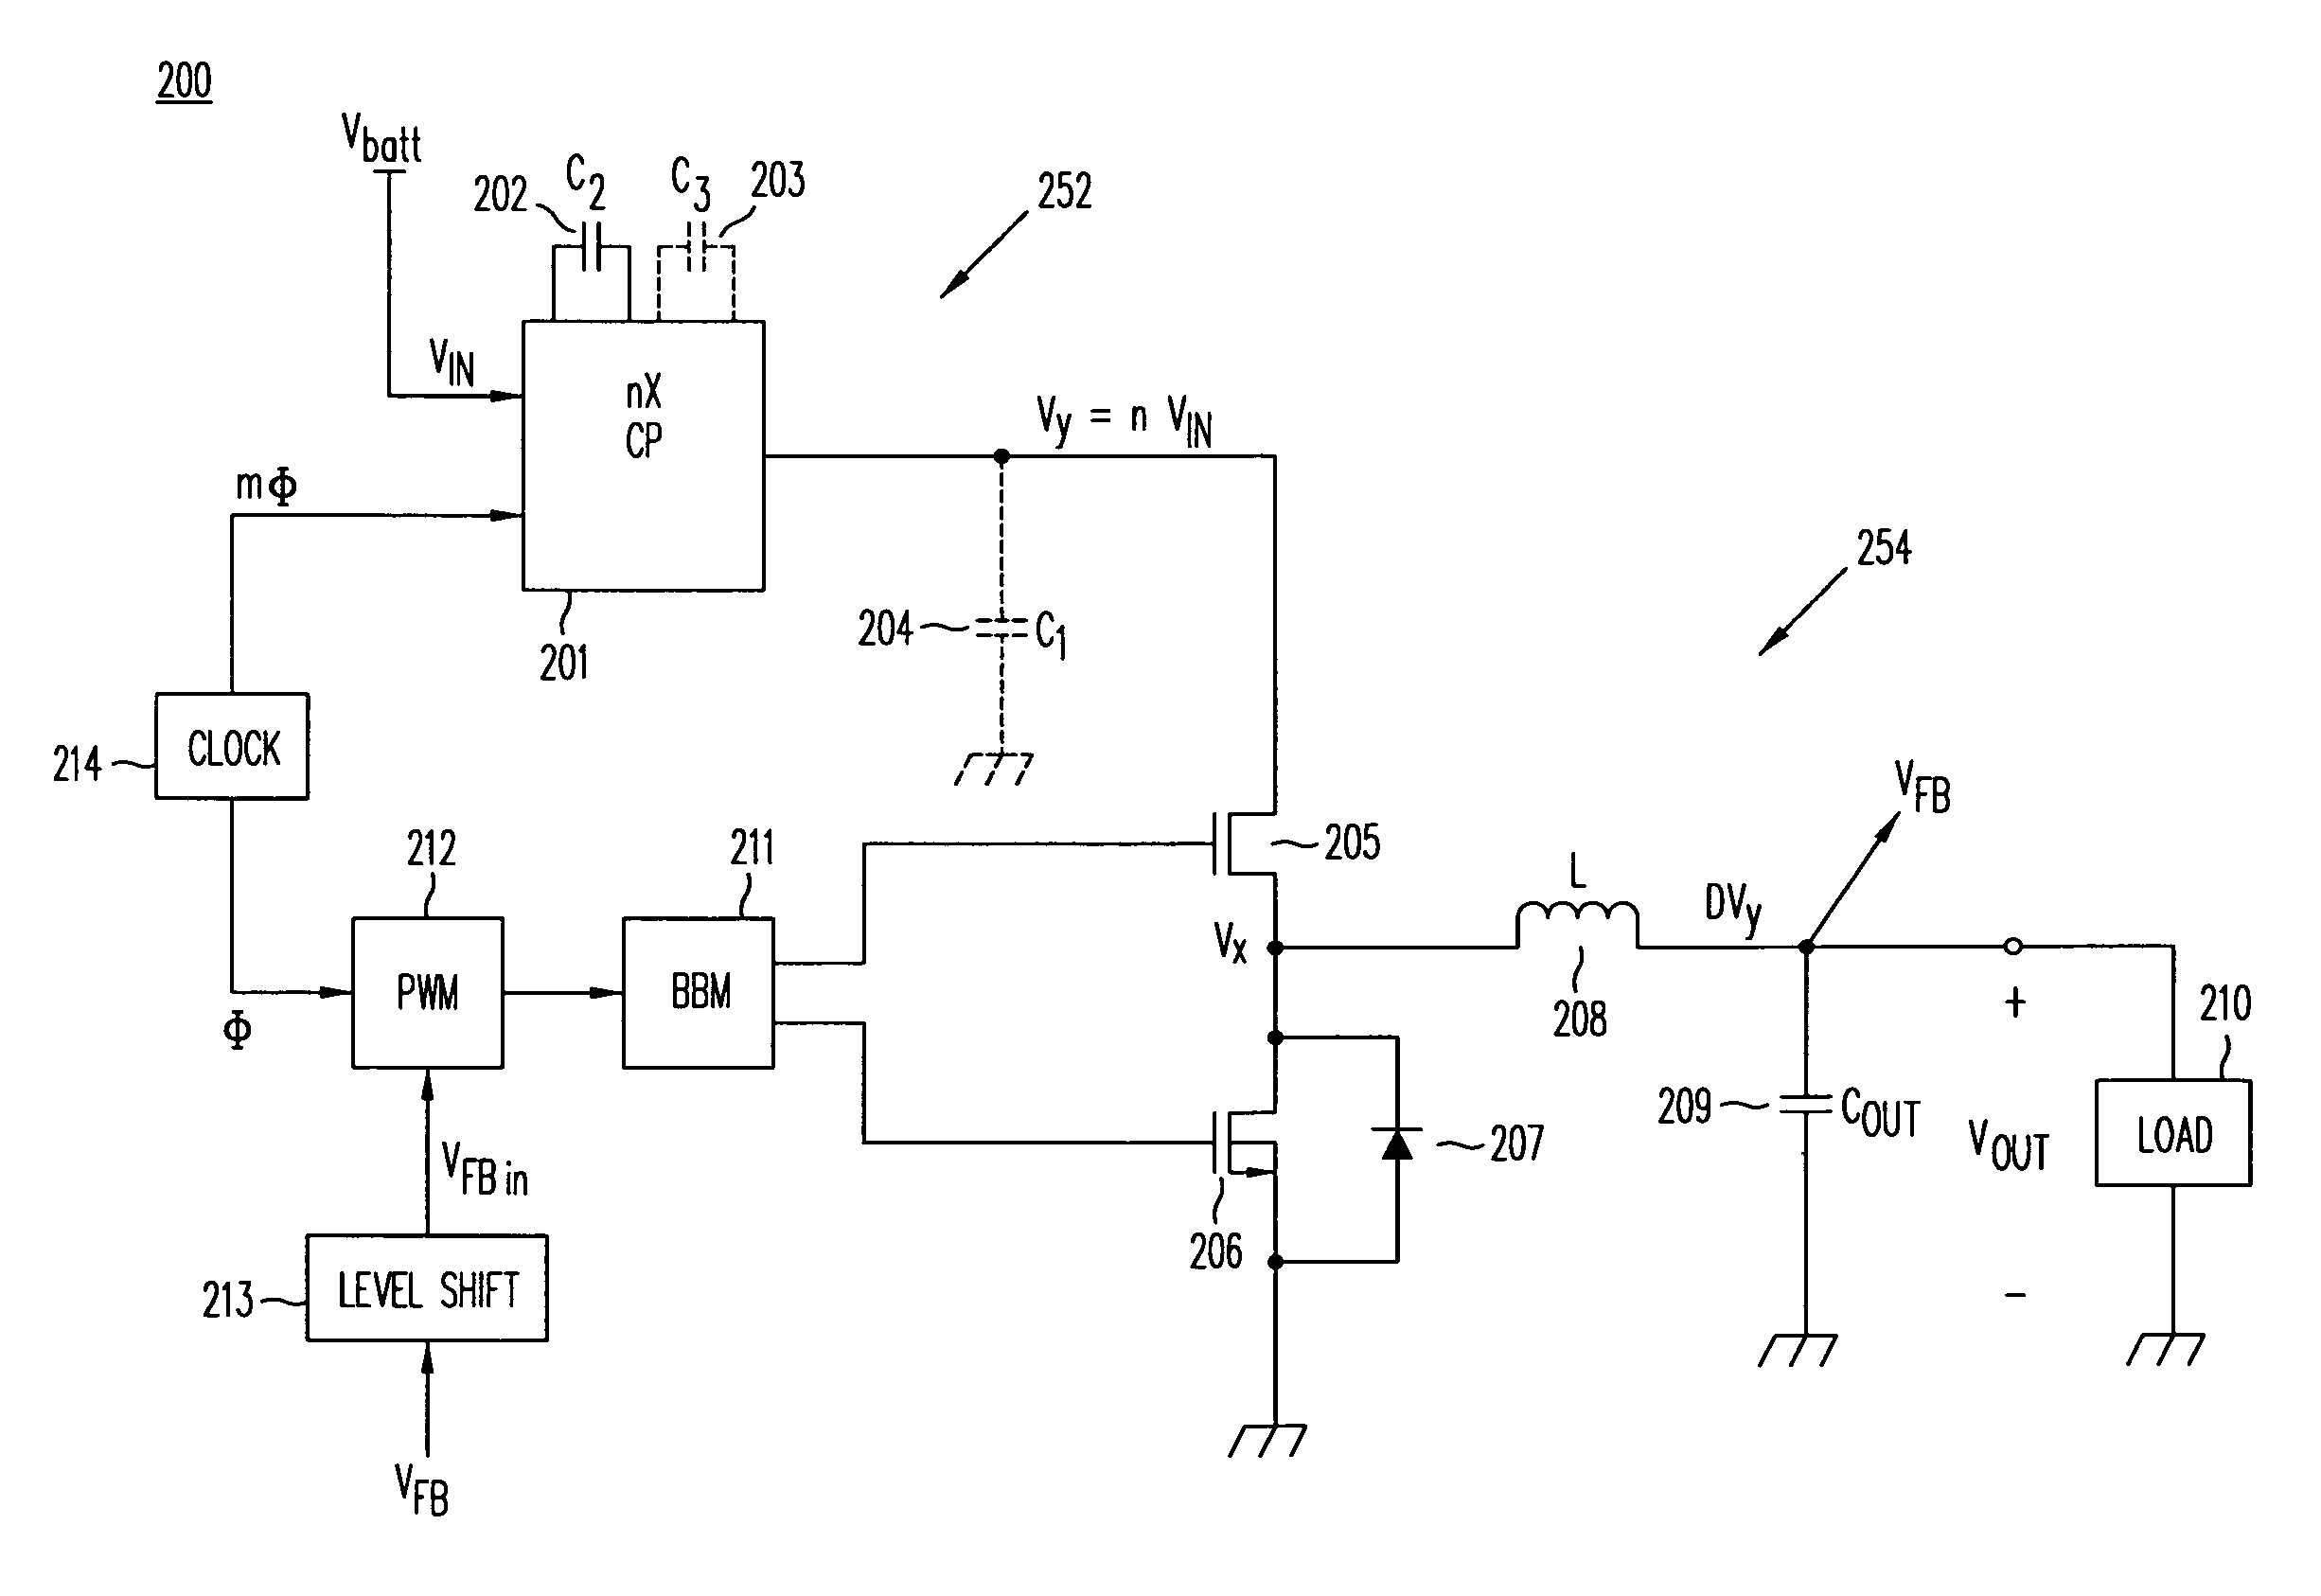 High-efficiency DC/DC voltage converter including capacitive switching pre-converter and down inductive switching post-regulator